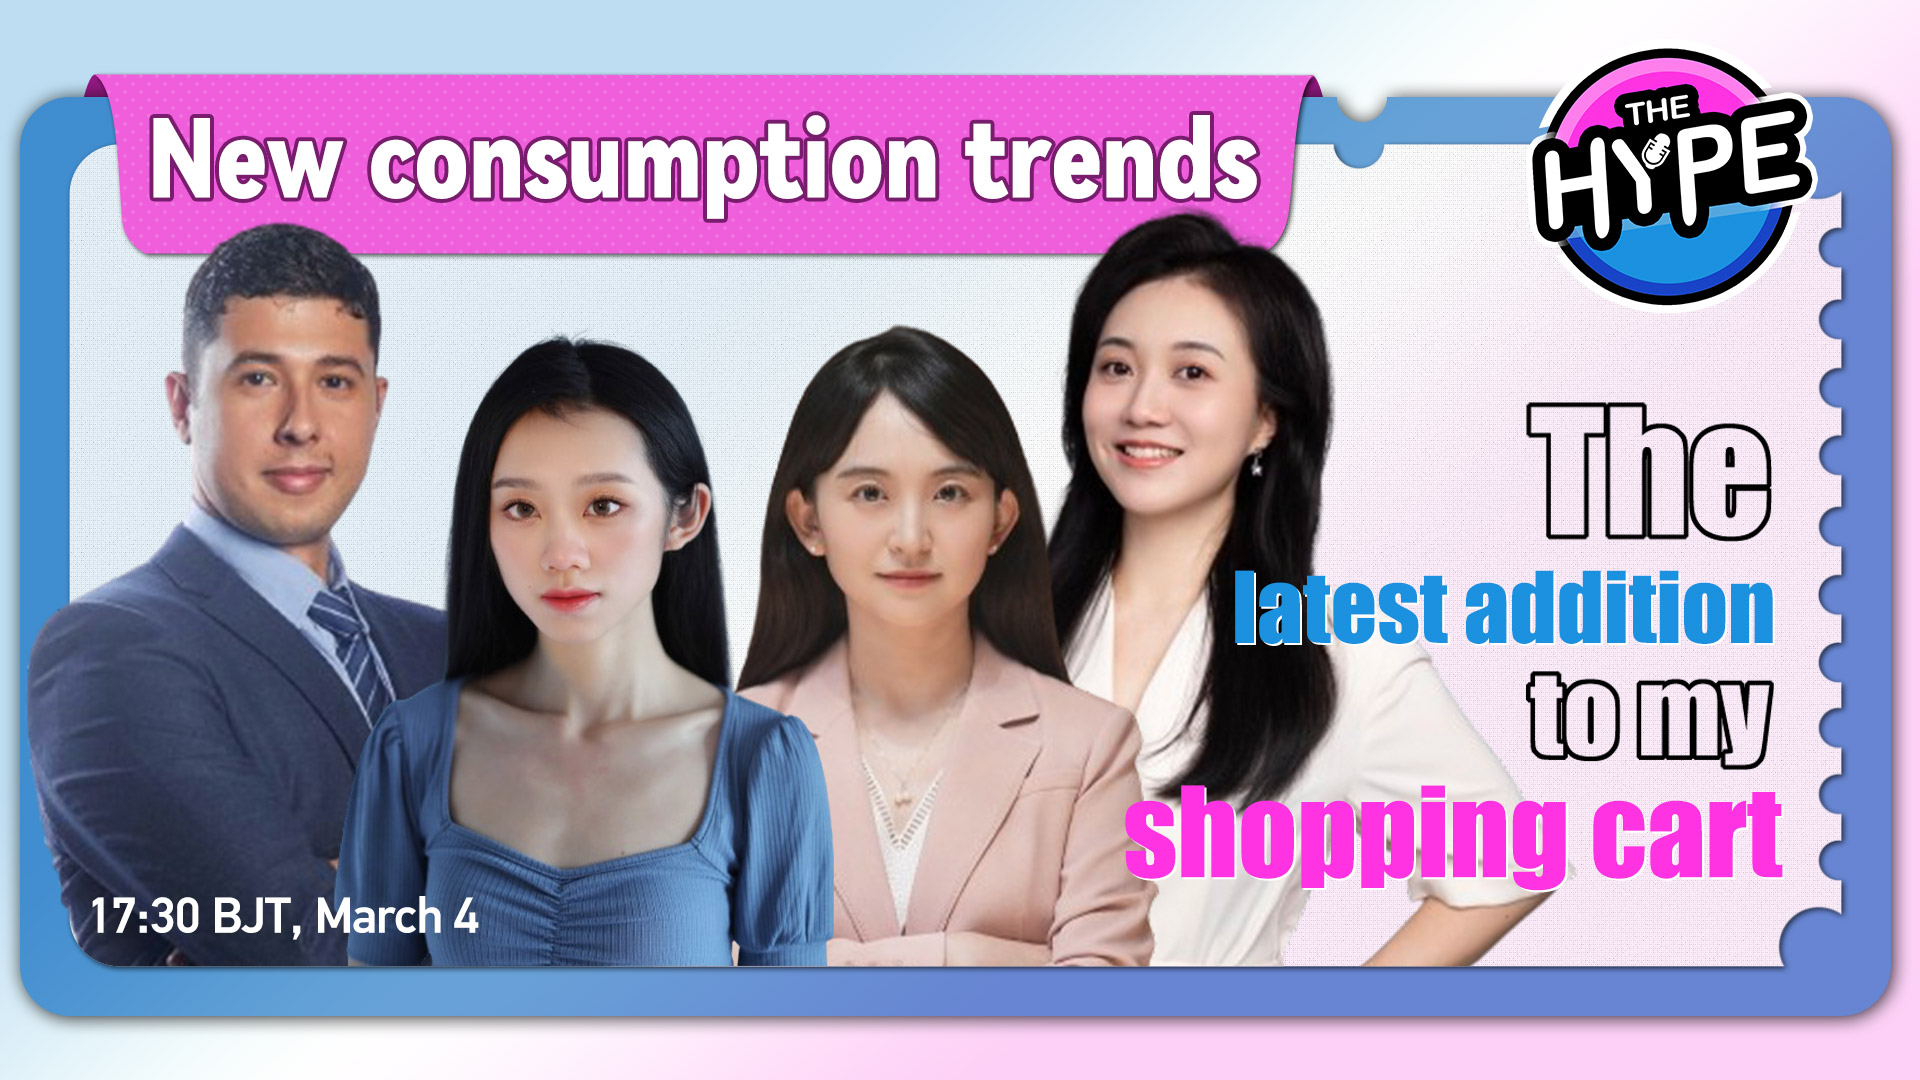 Live: THE HYPE – New consumption trends: The latest addition to my shopping cart